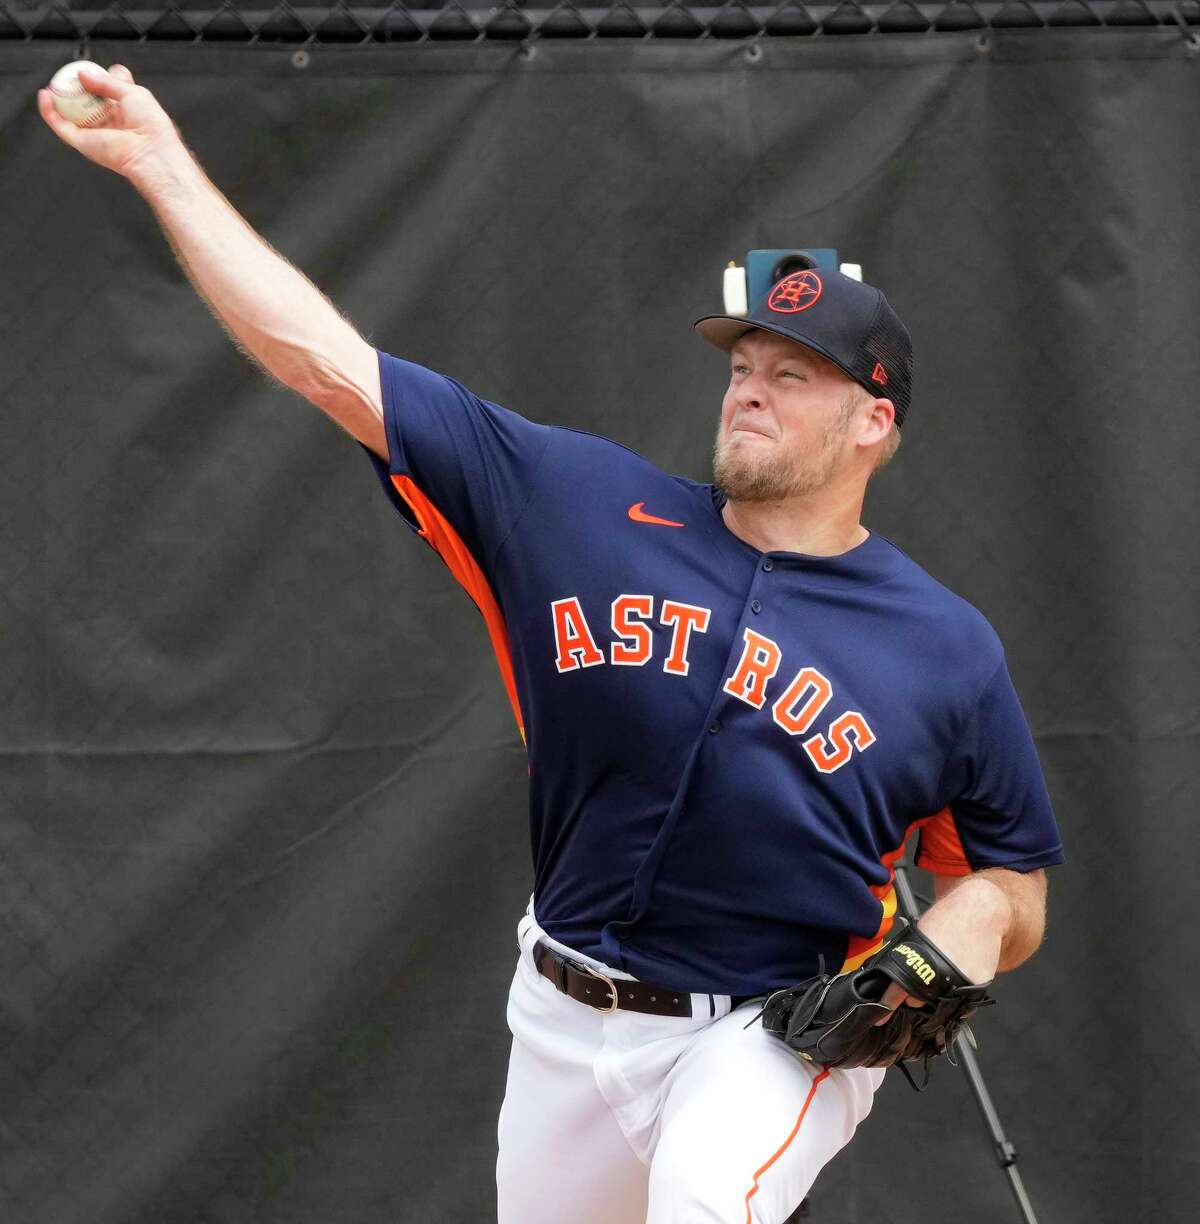 Houston Astros pitcher Ty Buttrey (51) pitches during workouts for pitchers and catchers at the Astros spring training complex at The Ballpark of the Palm Beaches on Friday, Feb. 17, 2023 in West Palm Beach .